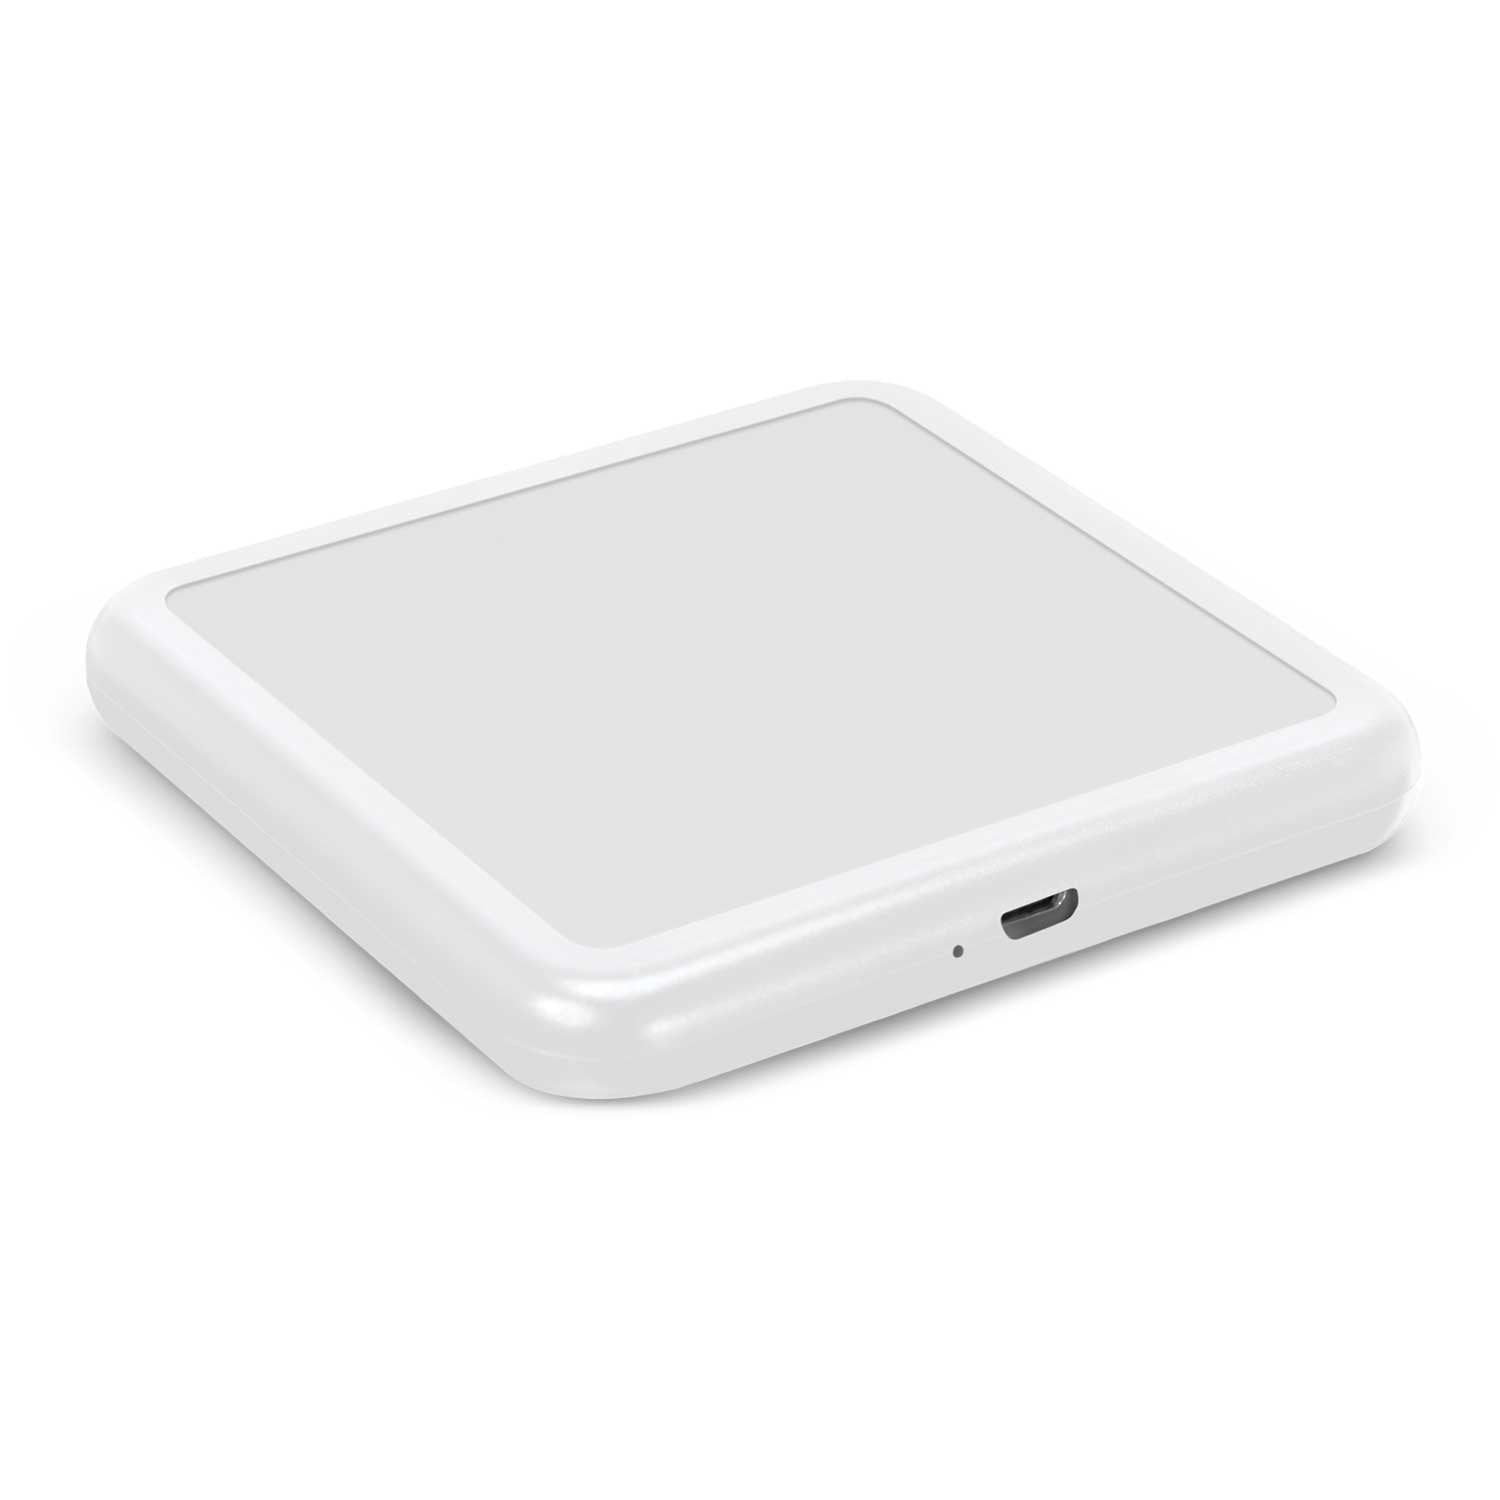 Imperium Square Wireless Charger  Resin Finish [113420]